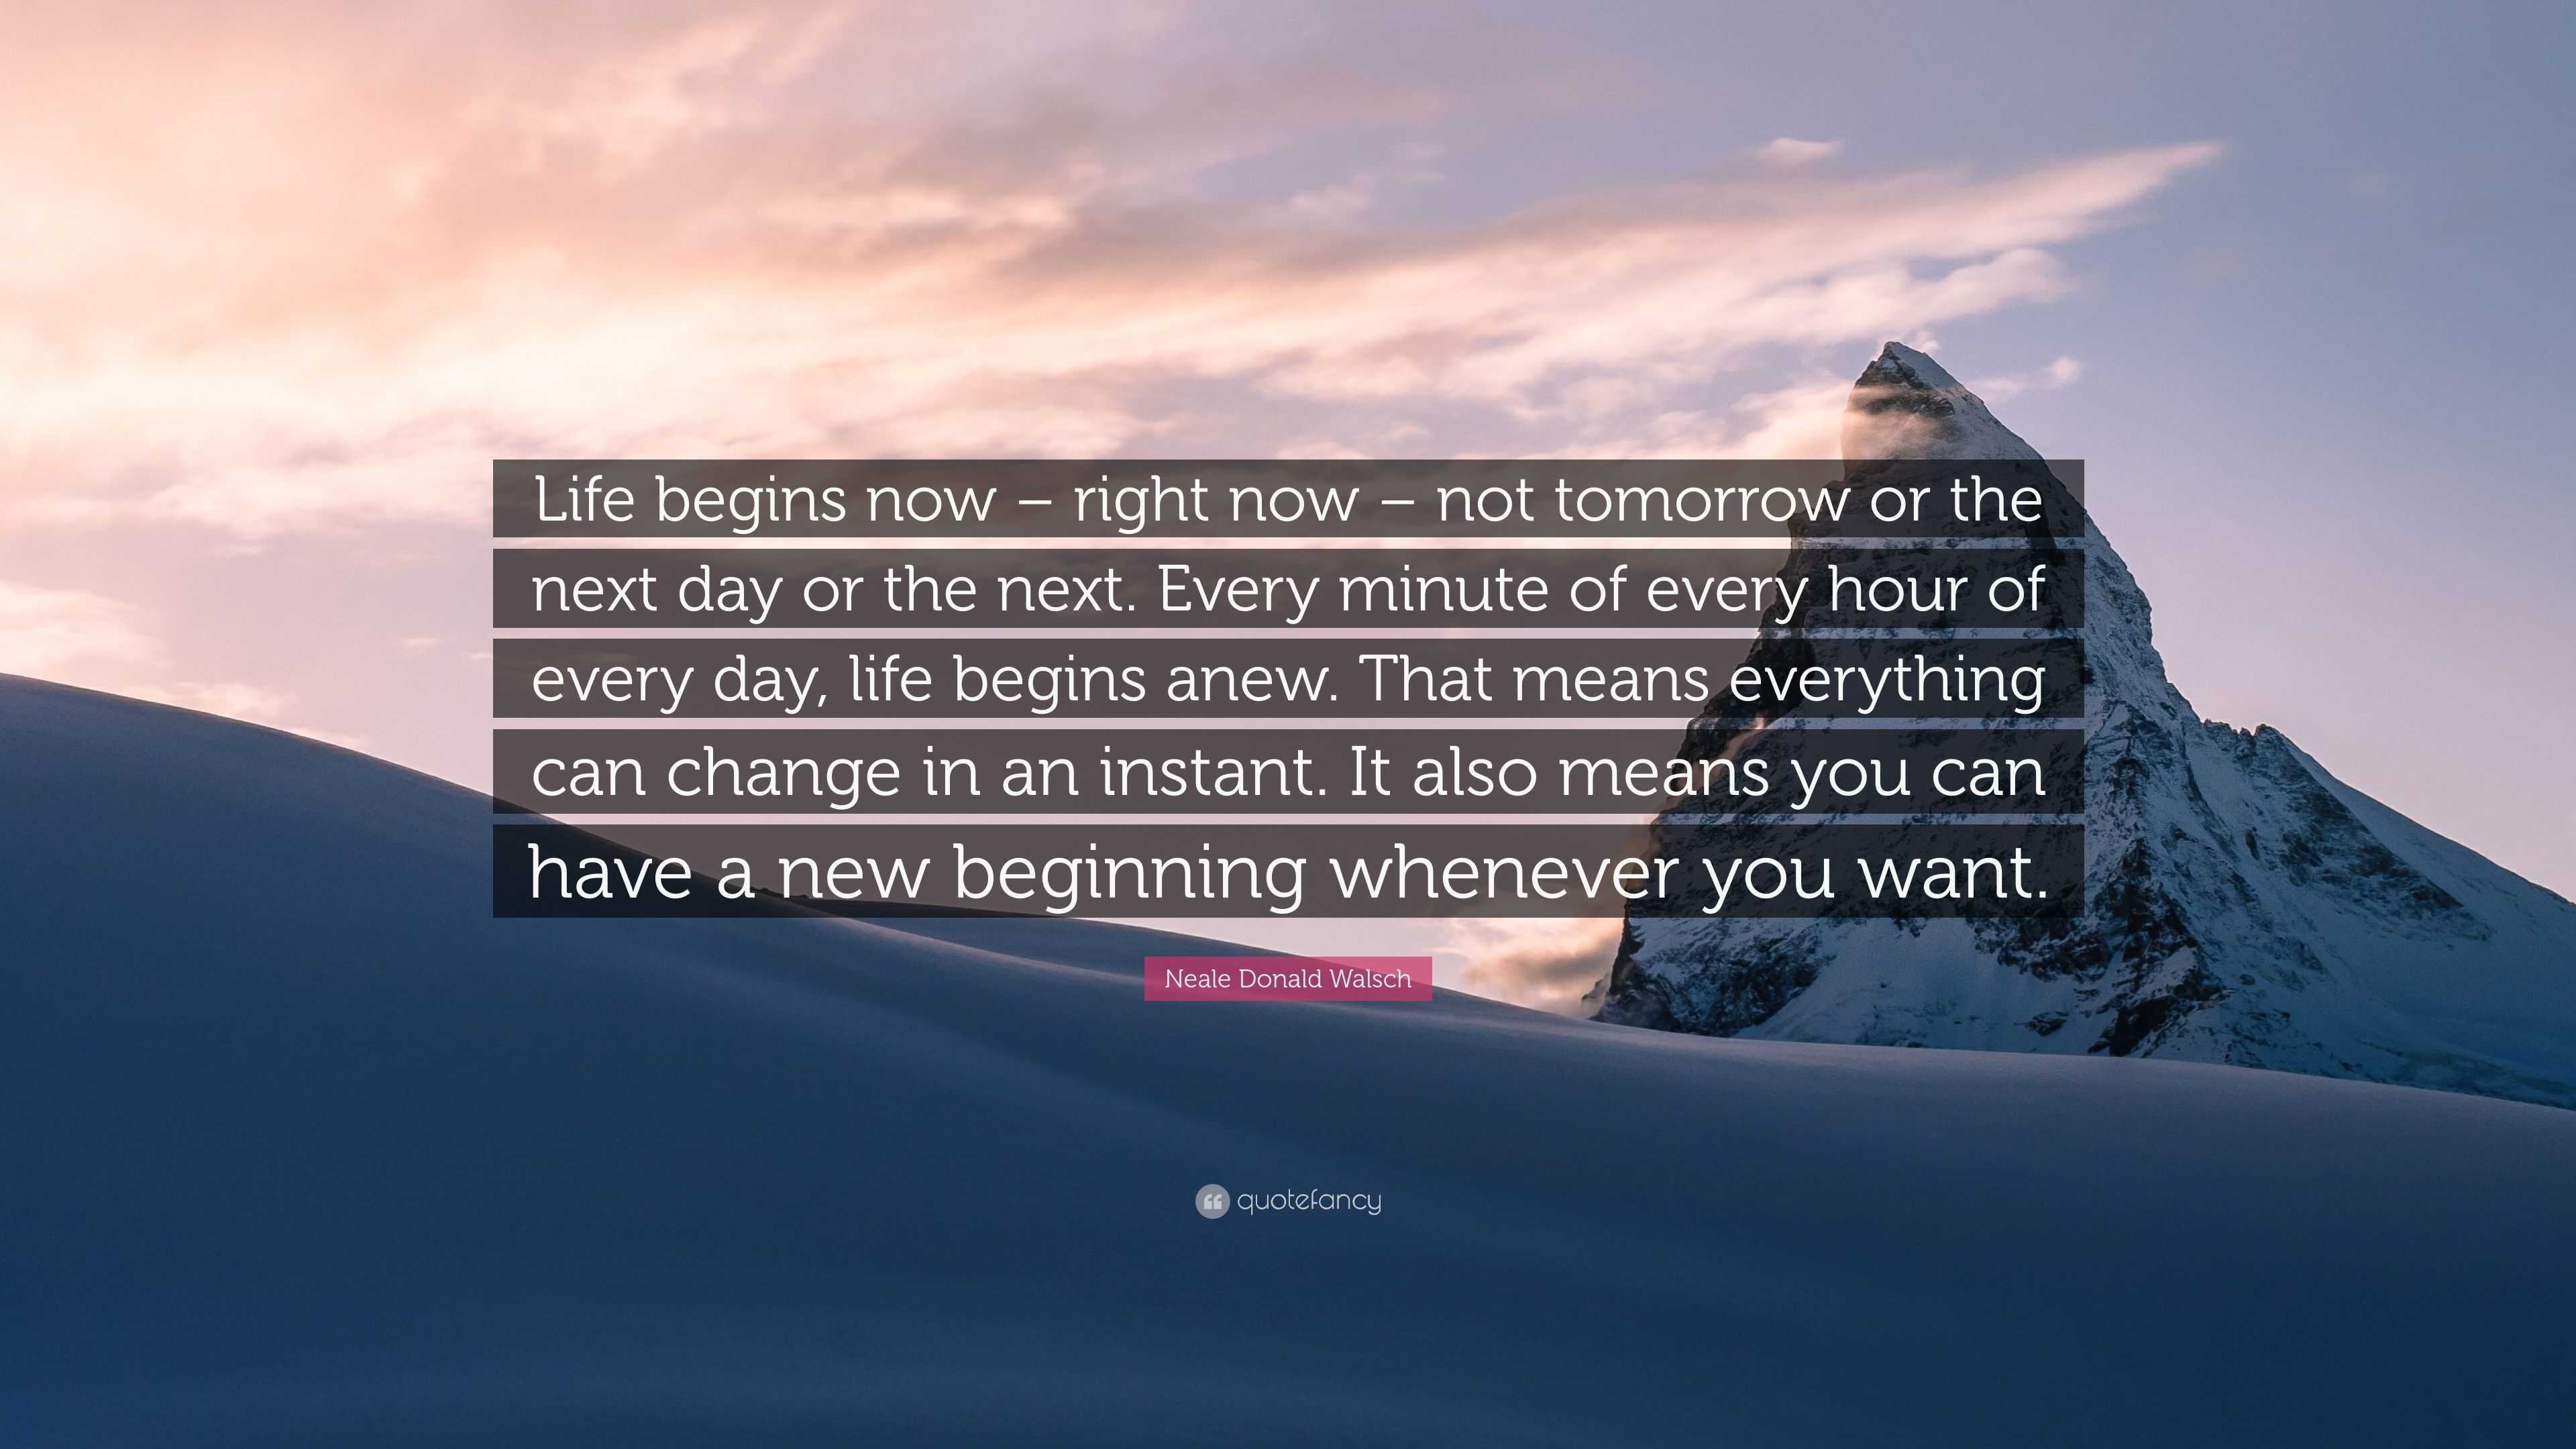 Neale Donald Walsch Quote: “Life Begins Now – Right Now – Not Tomorrow Or The Next Day Or The Next. Every Minute Of Every Hour Of Every Day, Life Be...”